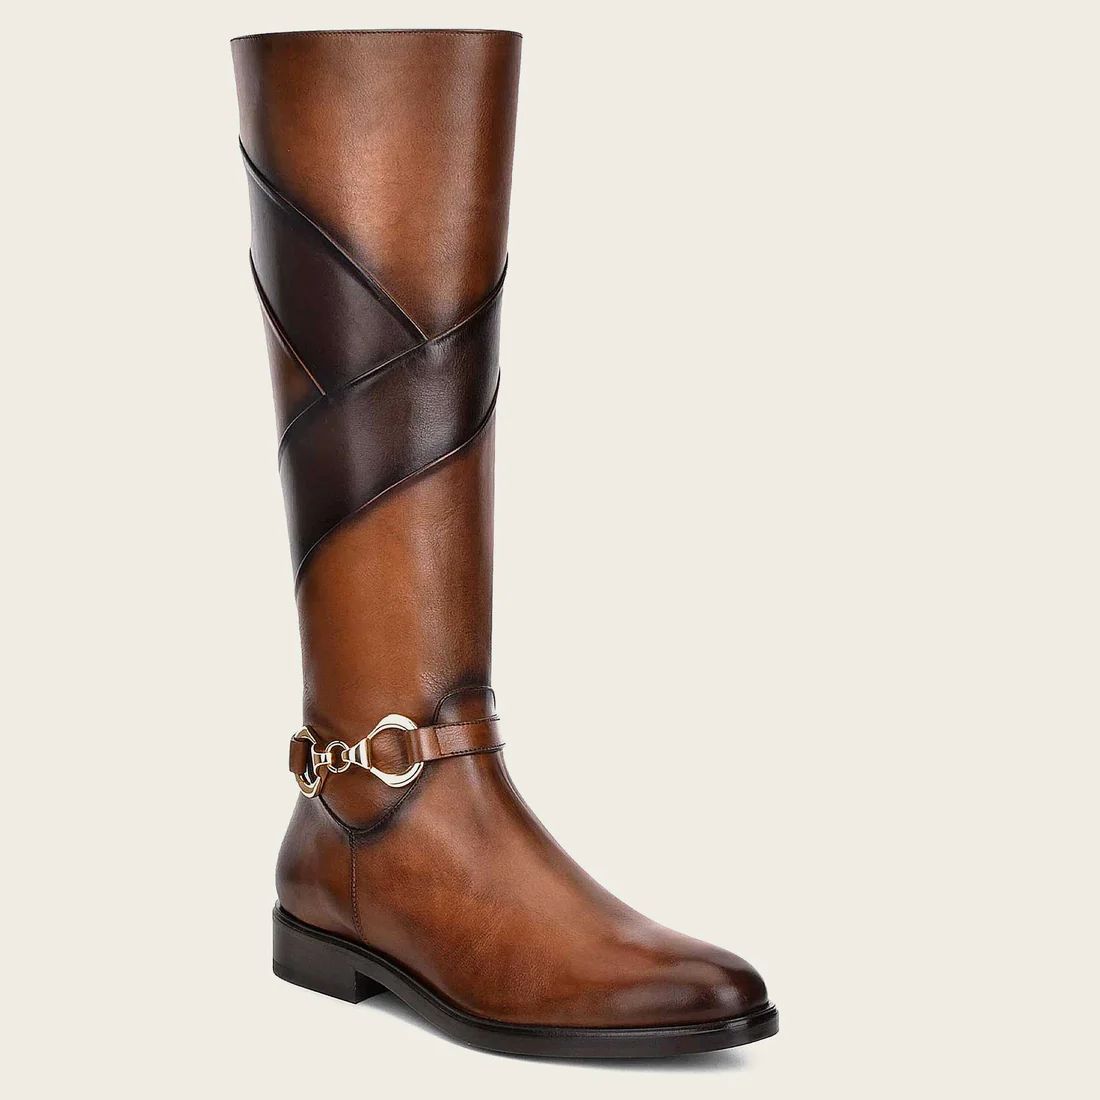 Cuadra | Hand-Painted Honey Leather Riding Boot With Contrasting Colors